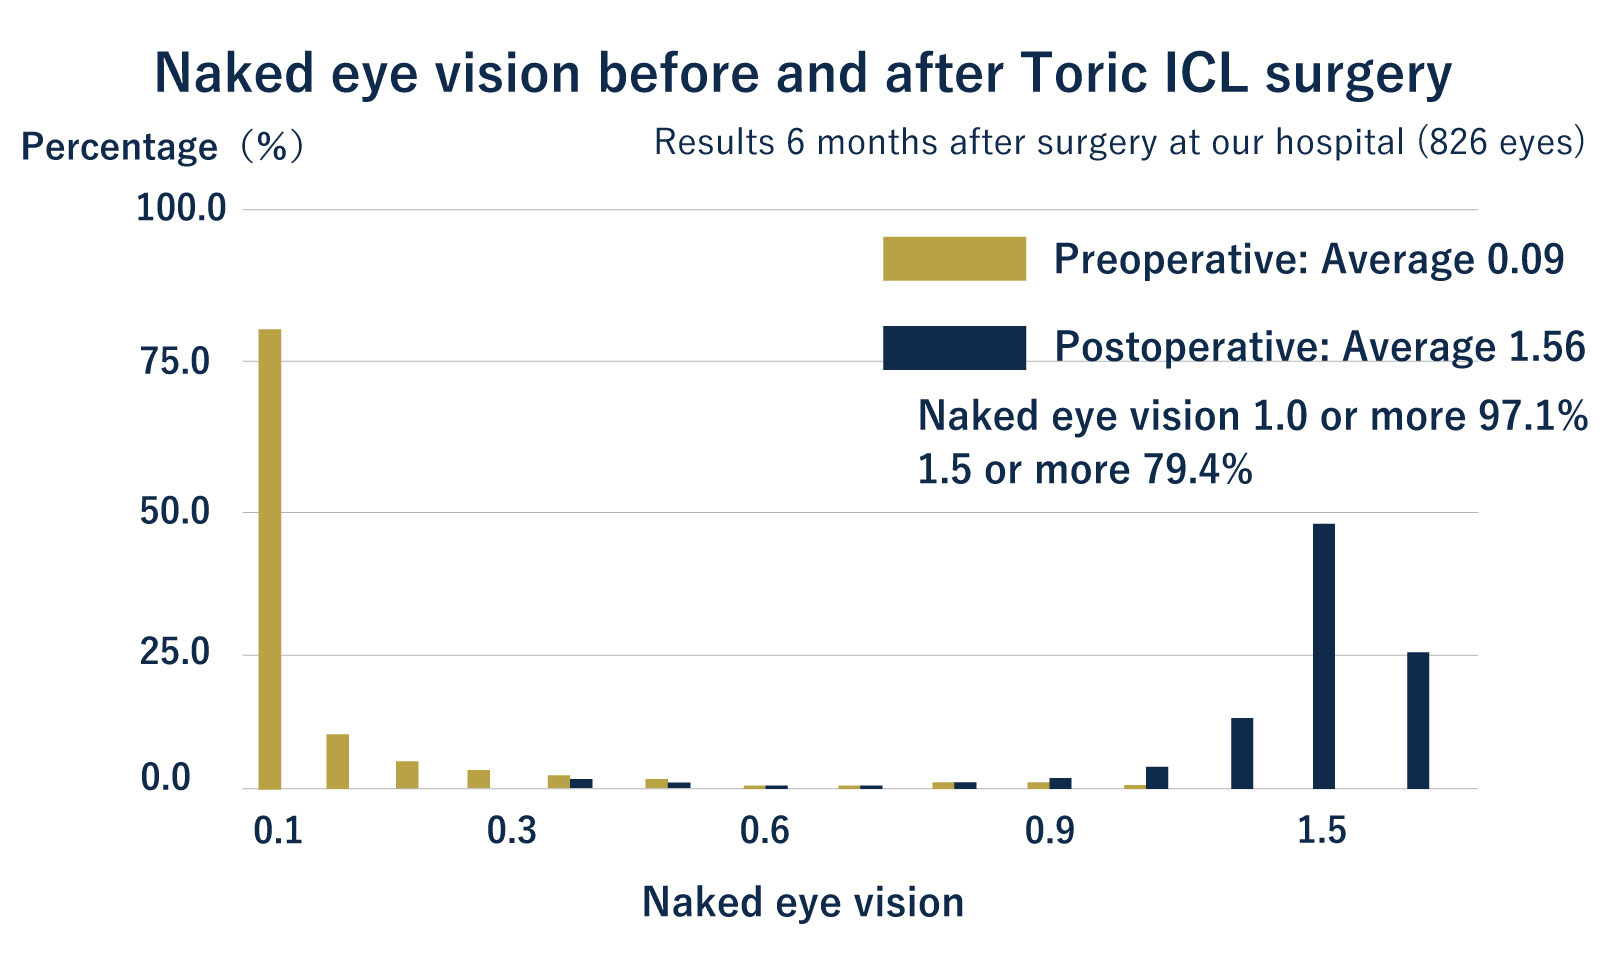 Naked eye vision before and after ICL surgery with astigmatism